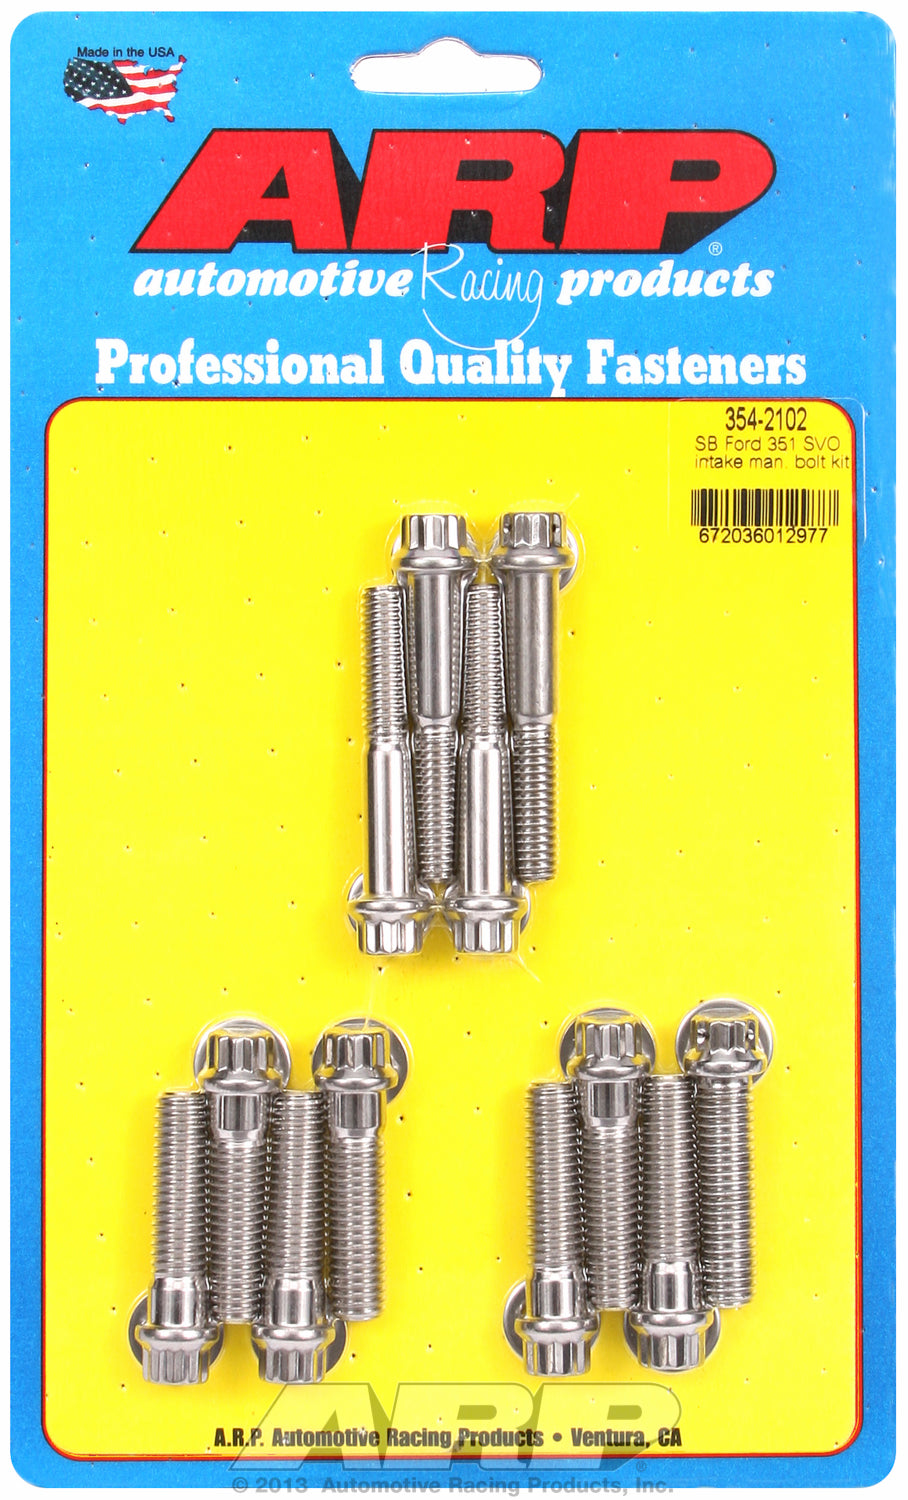 Hex Head Stainless Intake Manifold Bolts for Ford SVO 351 cid, Jack Roush design, drilled